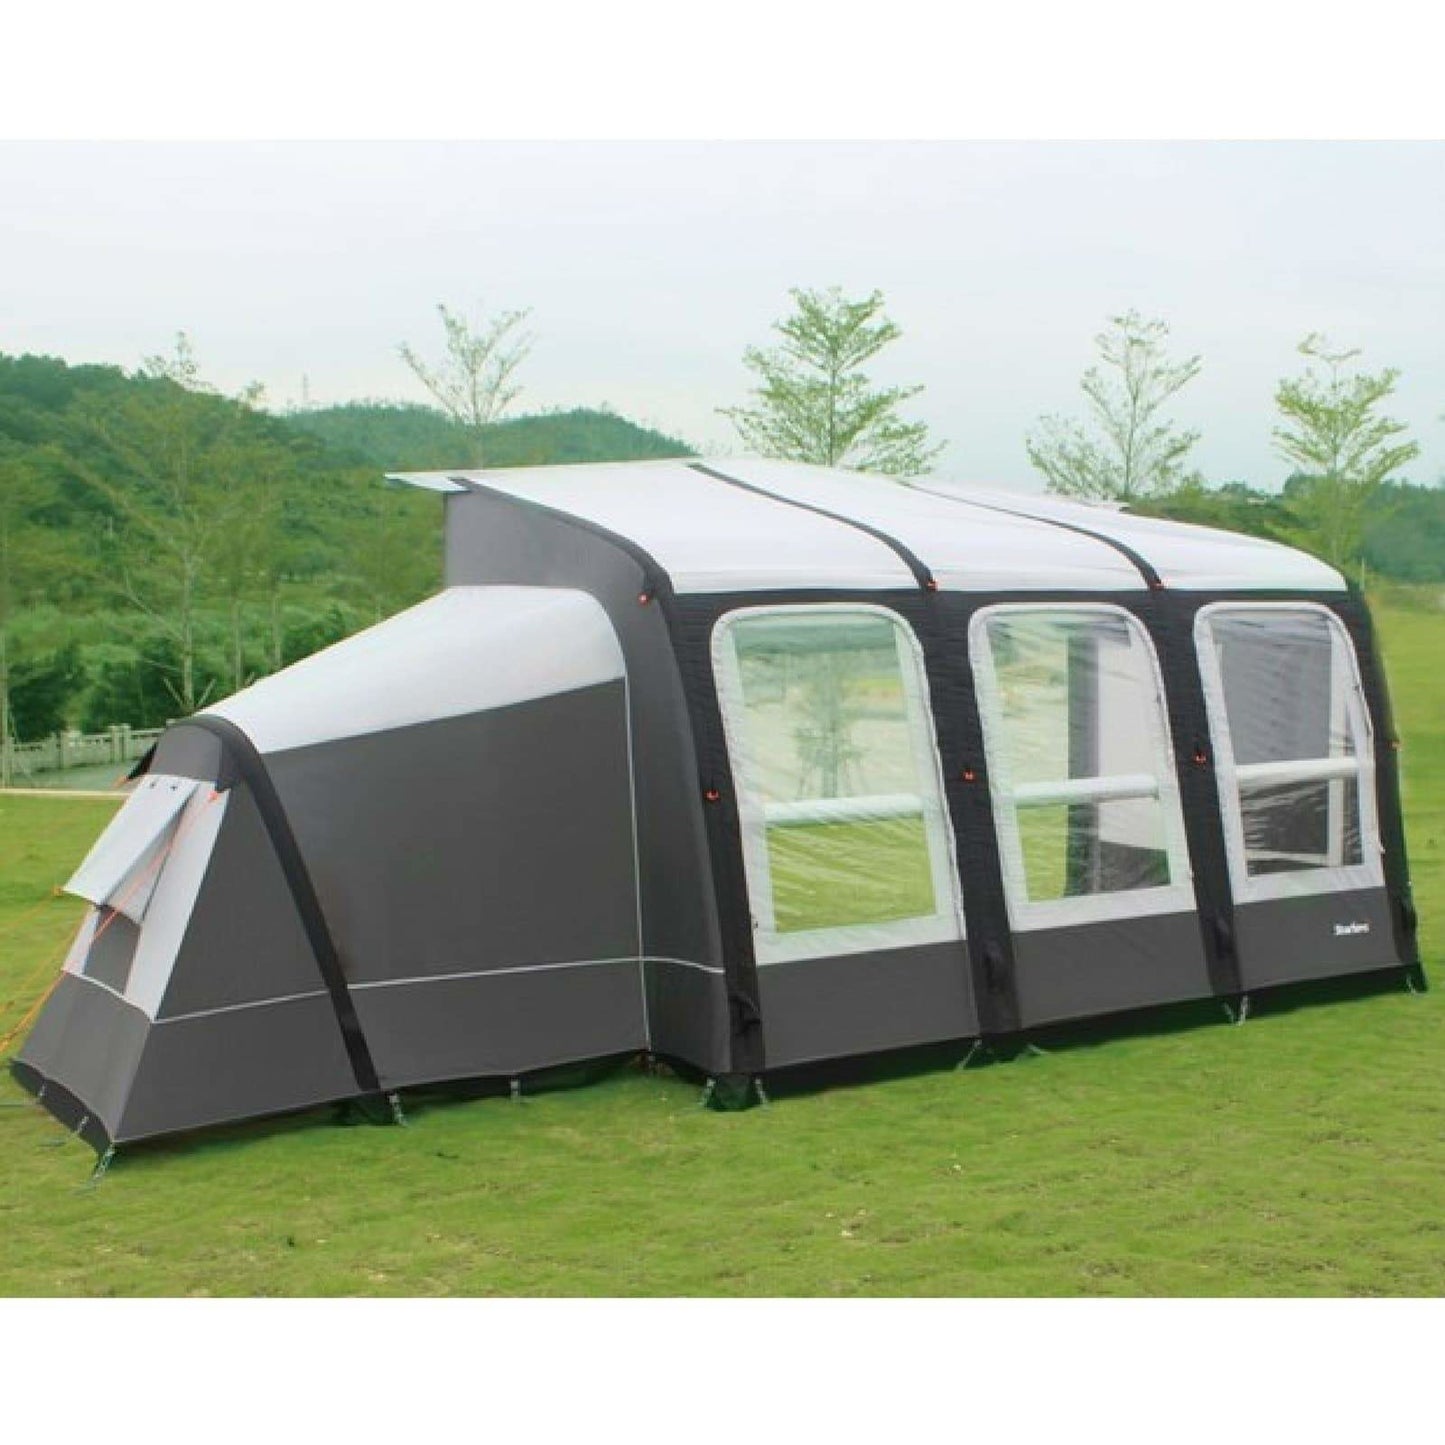 Camptech Starline 390 Inflatable Air Porch Caravan Awning + FREE Straps (2019) made by CampTech. A Air Awning sold by Quality Caravan Awnings